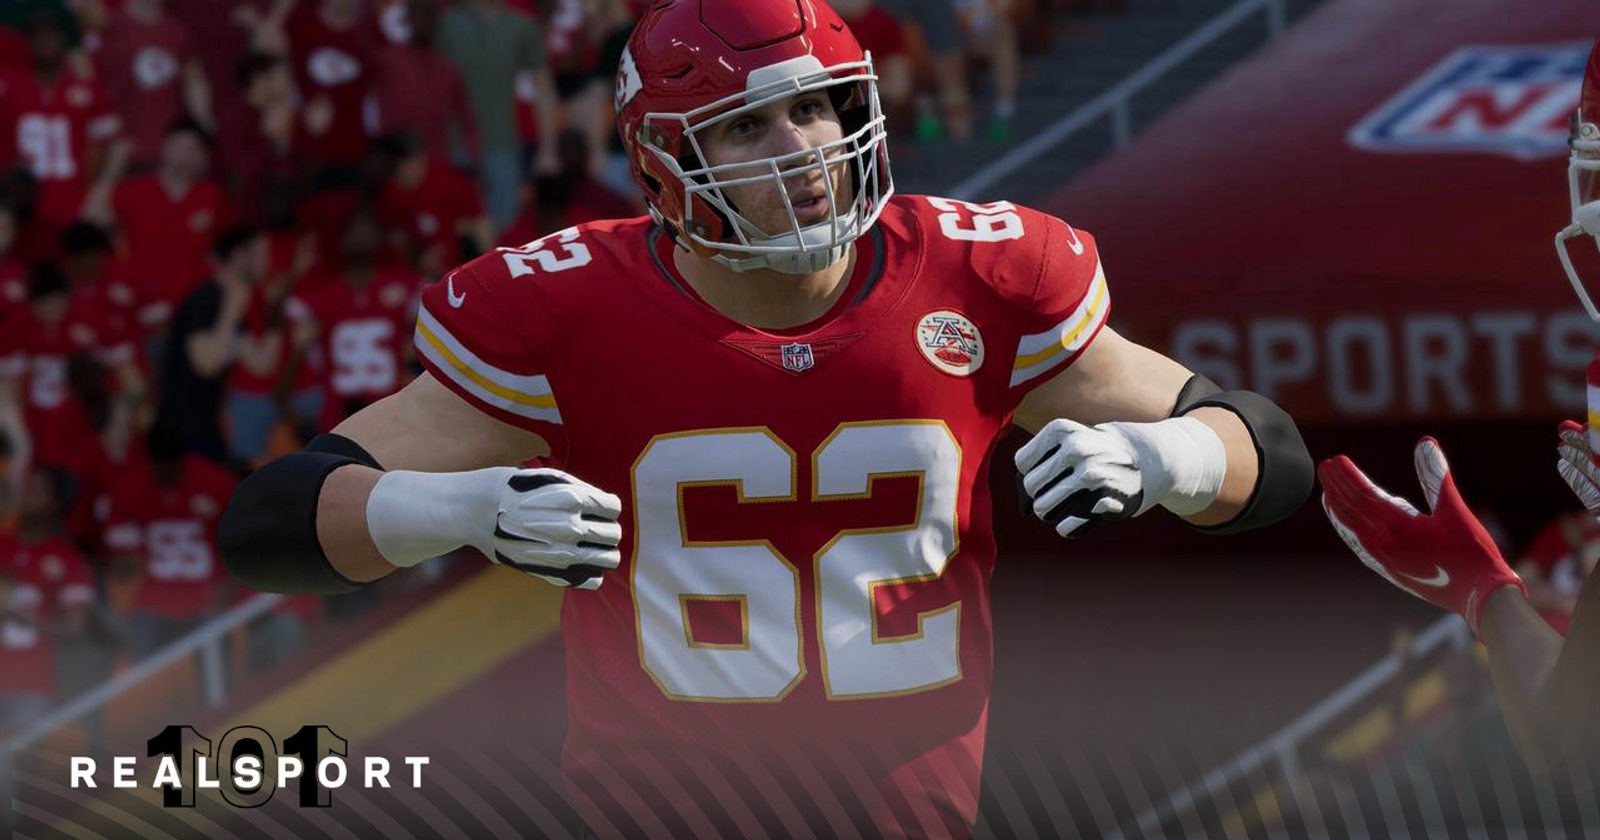 Madden 22 Ultimate Team: Heavyweights promo reveals five 97 OVR cards